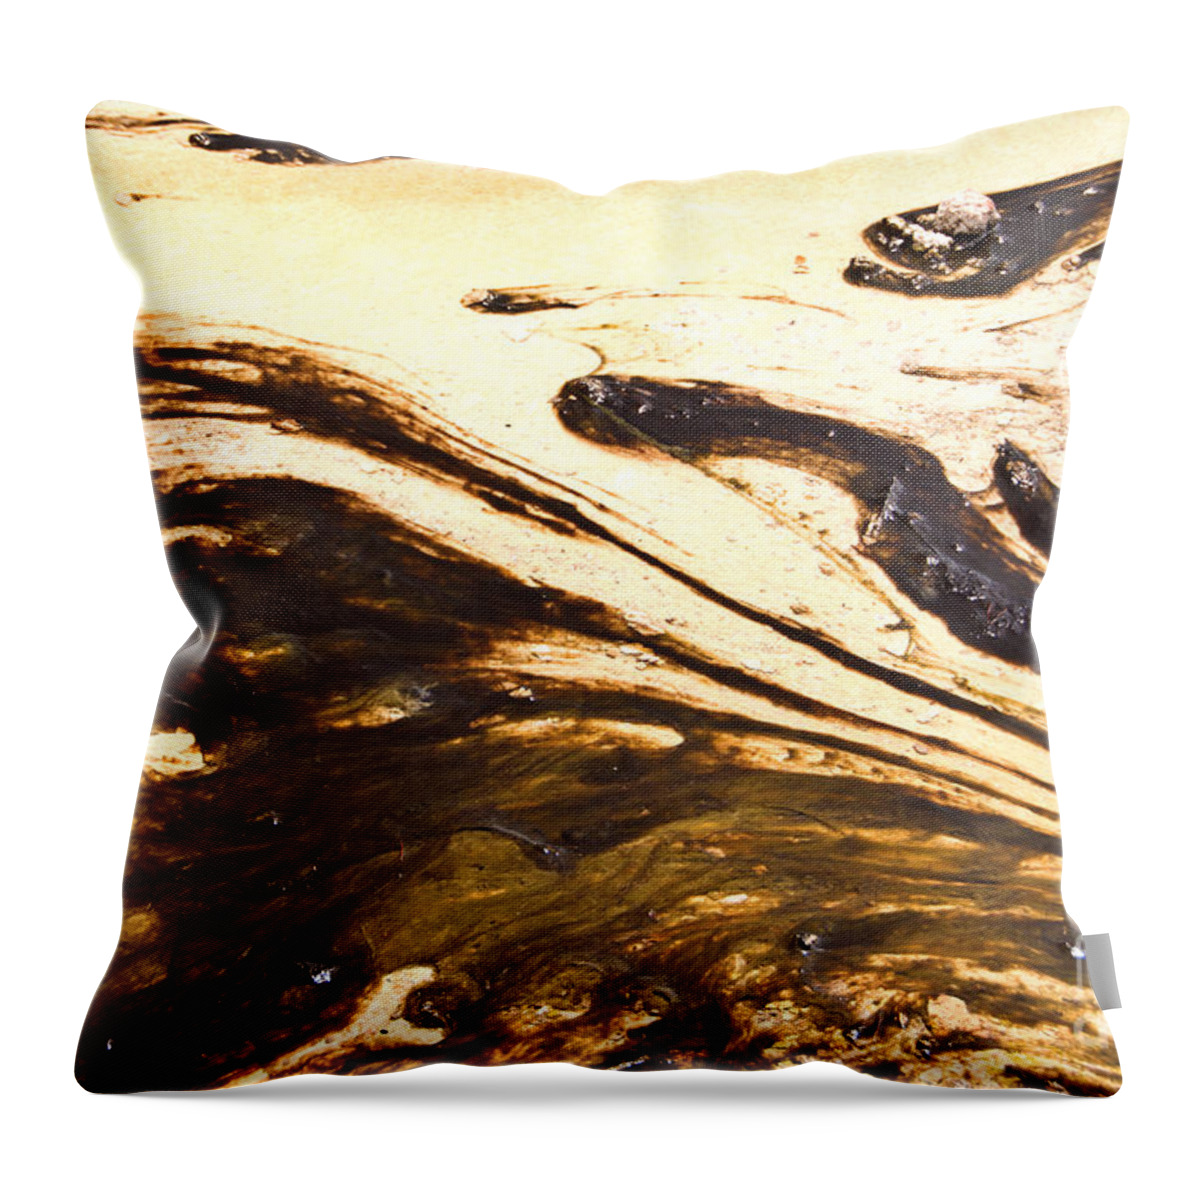 Algae Throw Pillow featuring the photograph Yellowstone Abstract 2 by Bob and Nancy Kendrick